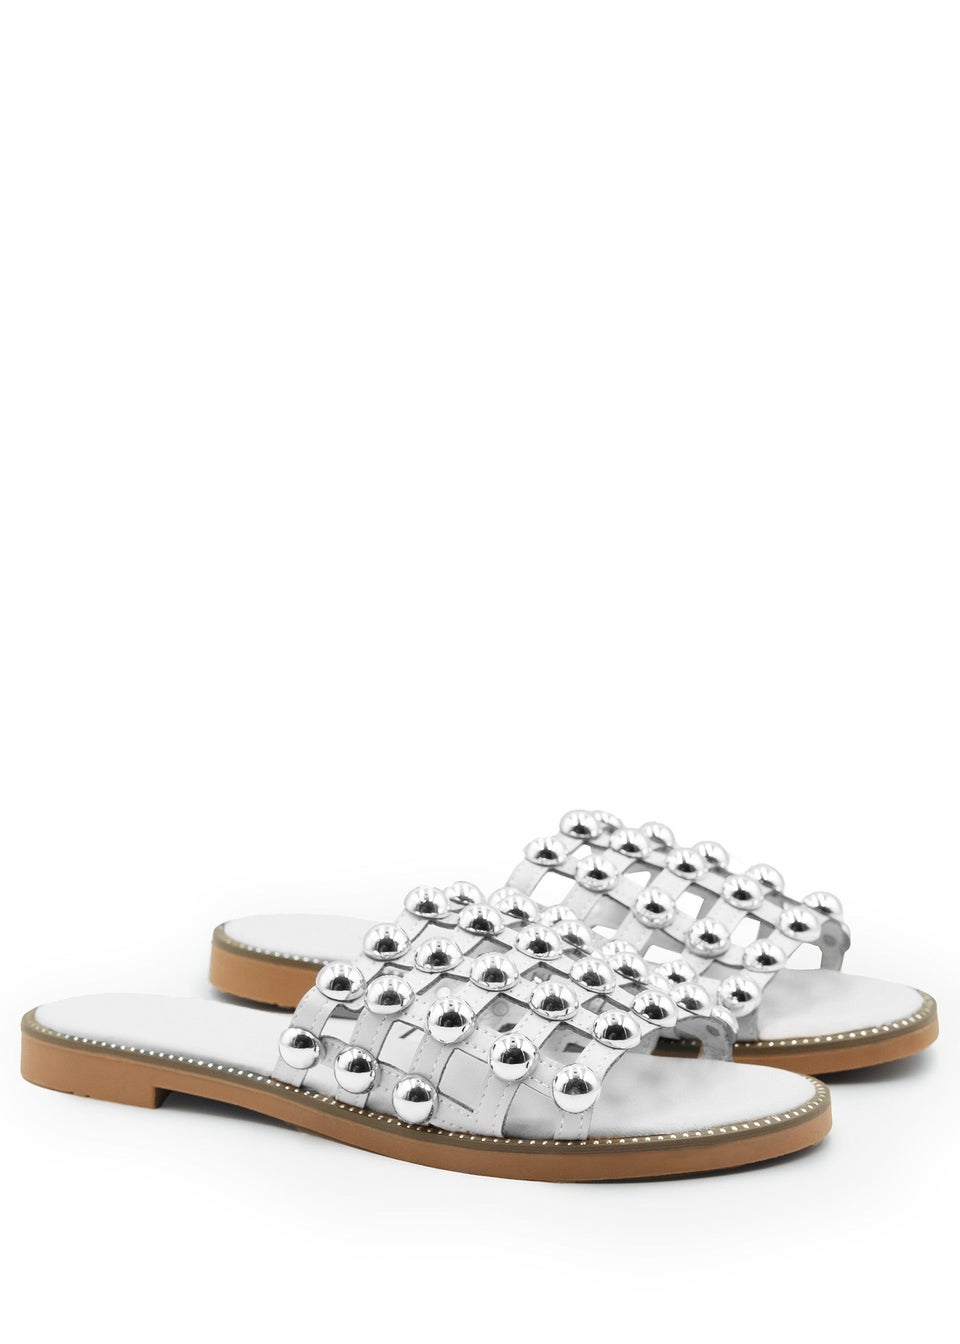 Where's That From White Pu Kelly Sliders With Studded Detailing